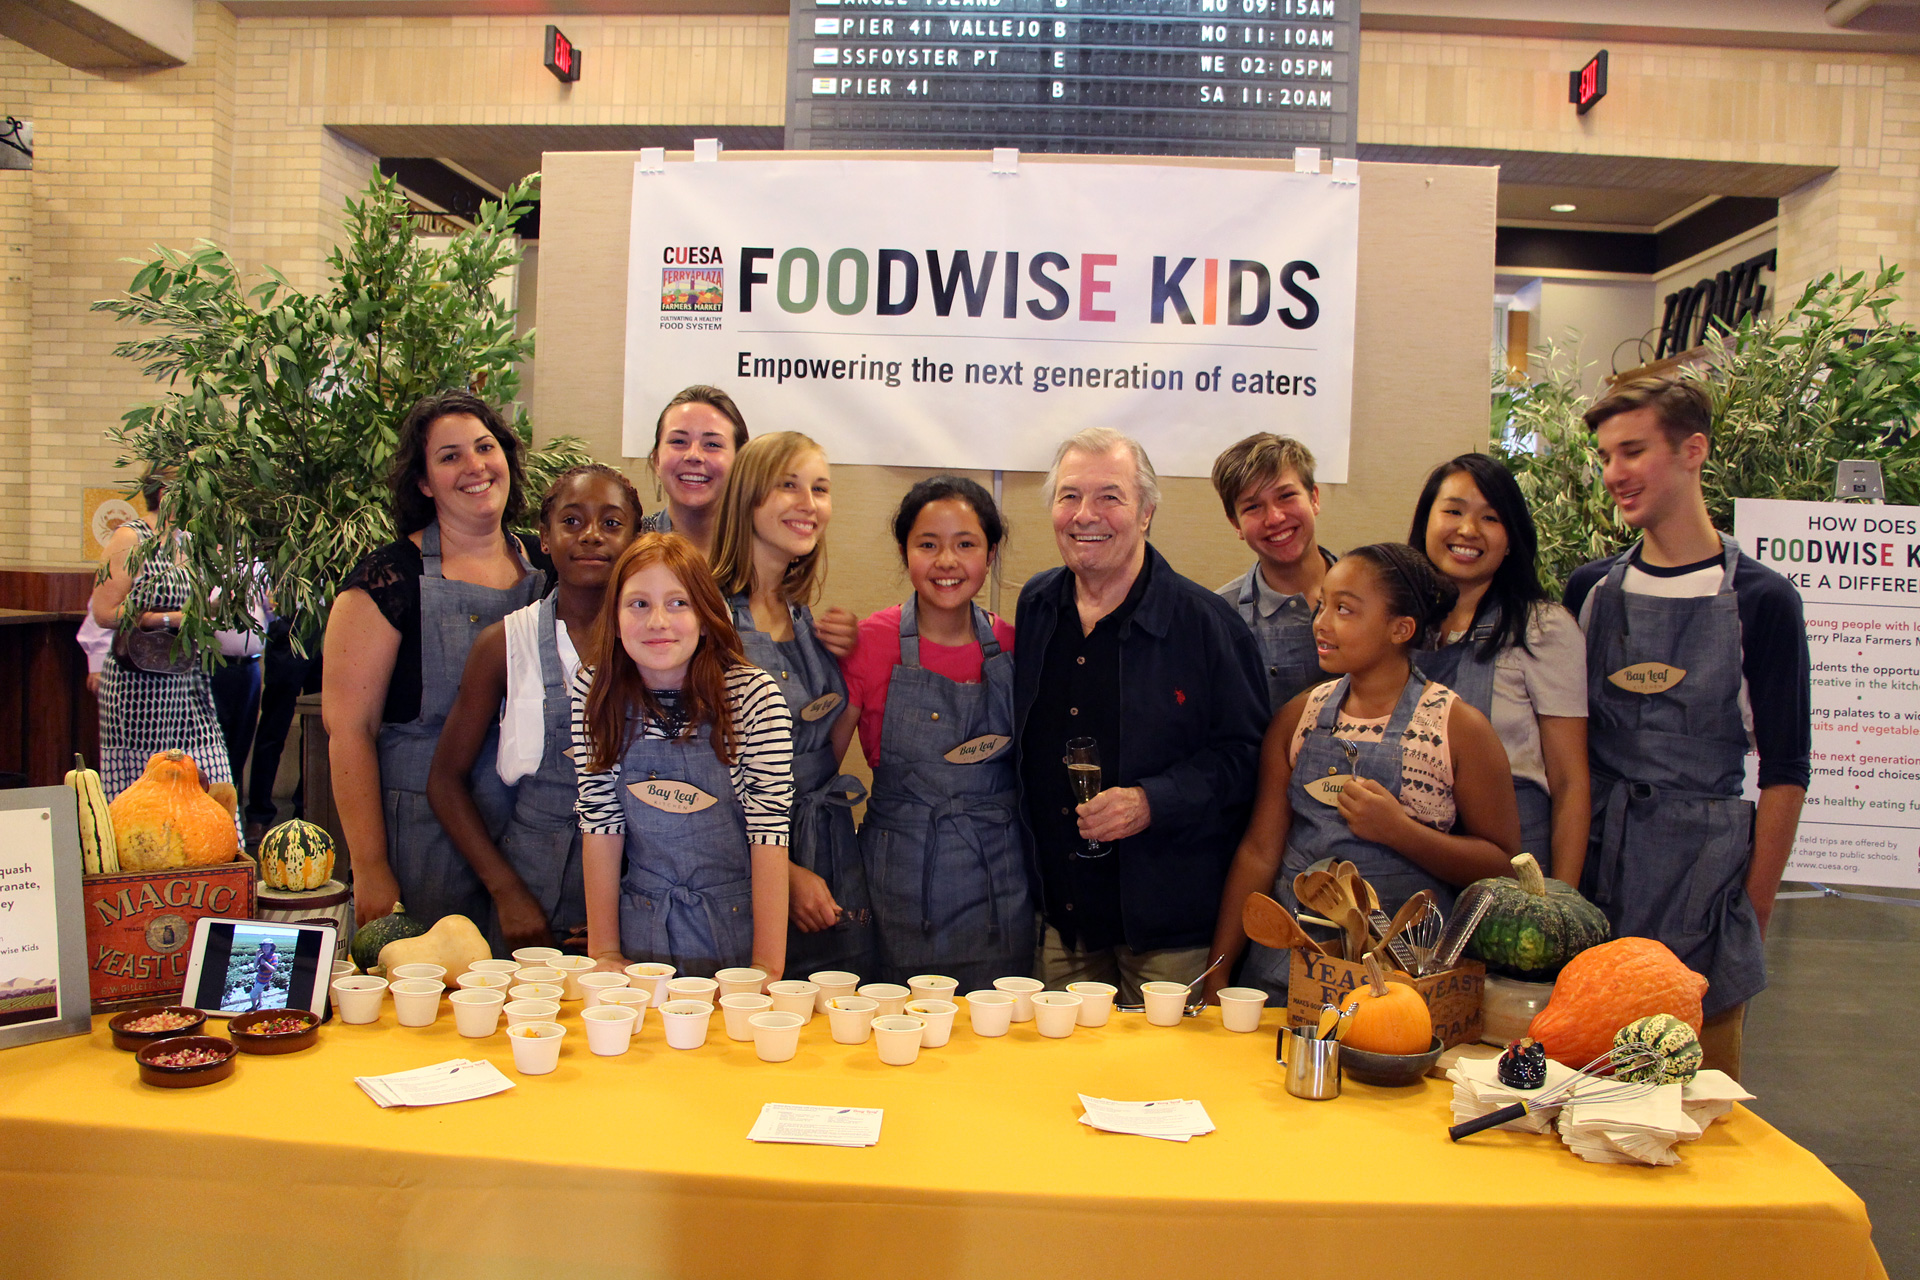 Jacques Pépin visits the Foodwise Kids booth at CUESA's Sunday Supper.